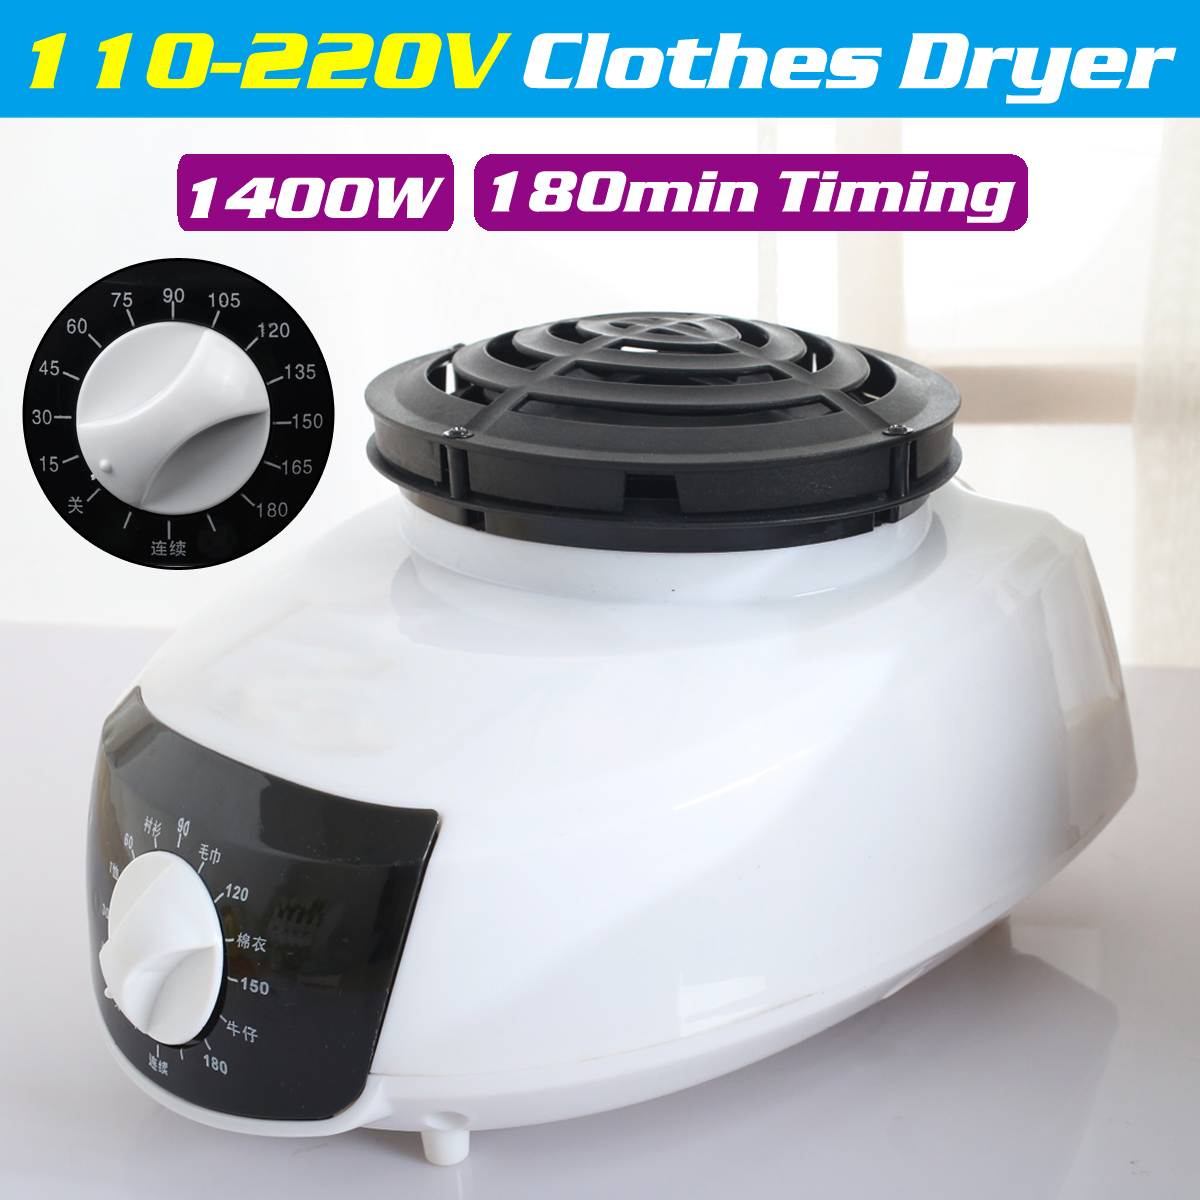 110-220V 1400W Electric Clothes Drying Rack Smart Clothes Dryer Outdoor Travel Mini Clothing Shoes laundry Foldable Heater Timer